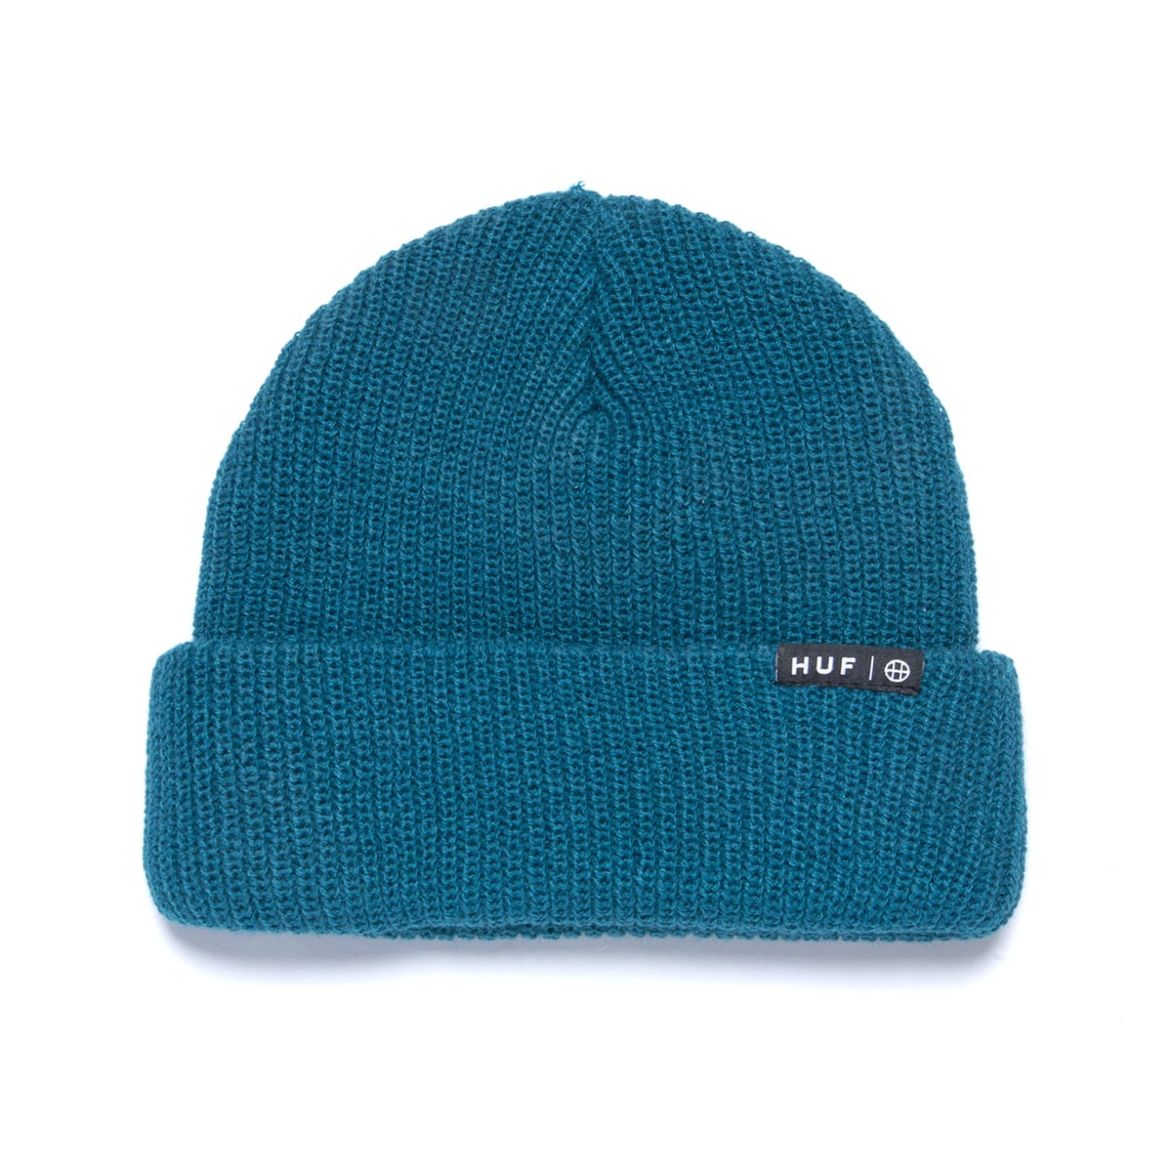 HUF - Essentials Usual Beanie, Bold Teal